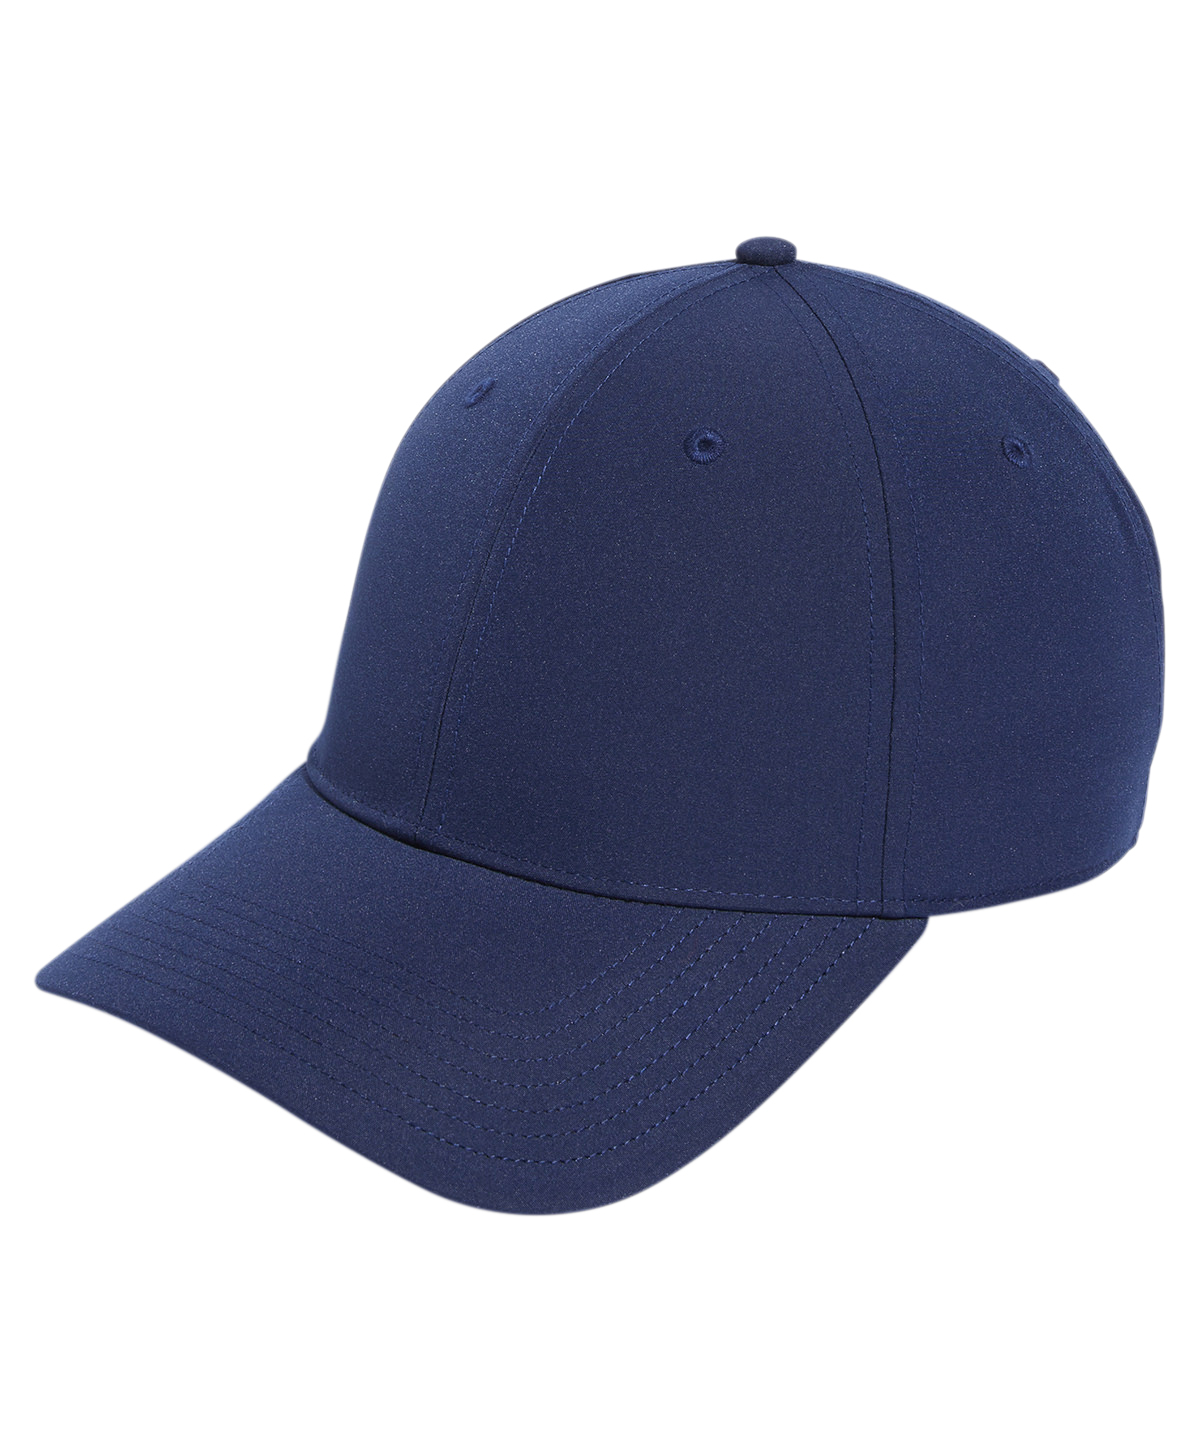 Adidas Golf Performance Crestable Cap Navy Size One Size